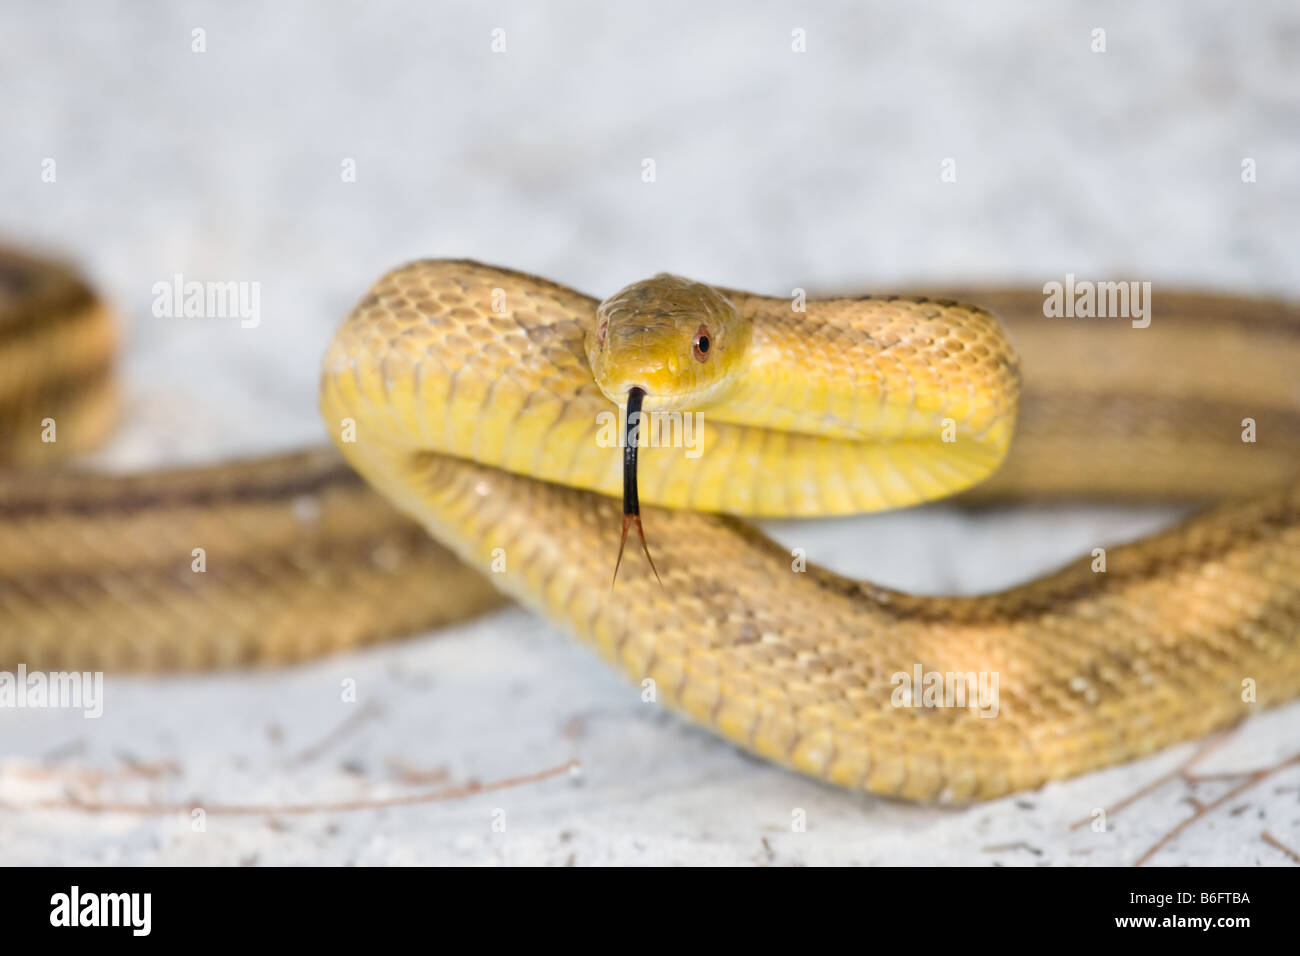 Elaphe obsoleta or yellow rat snake with forked tongue extended on a beach in western Florida Stock Photo